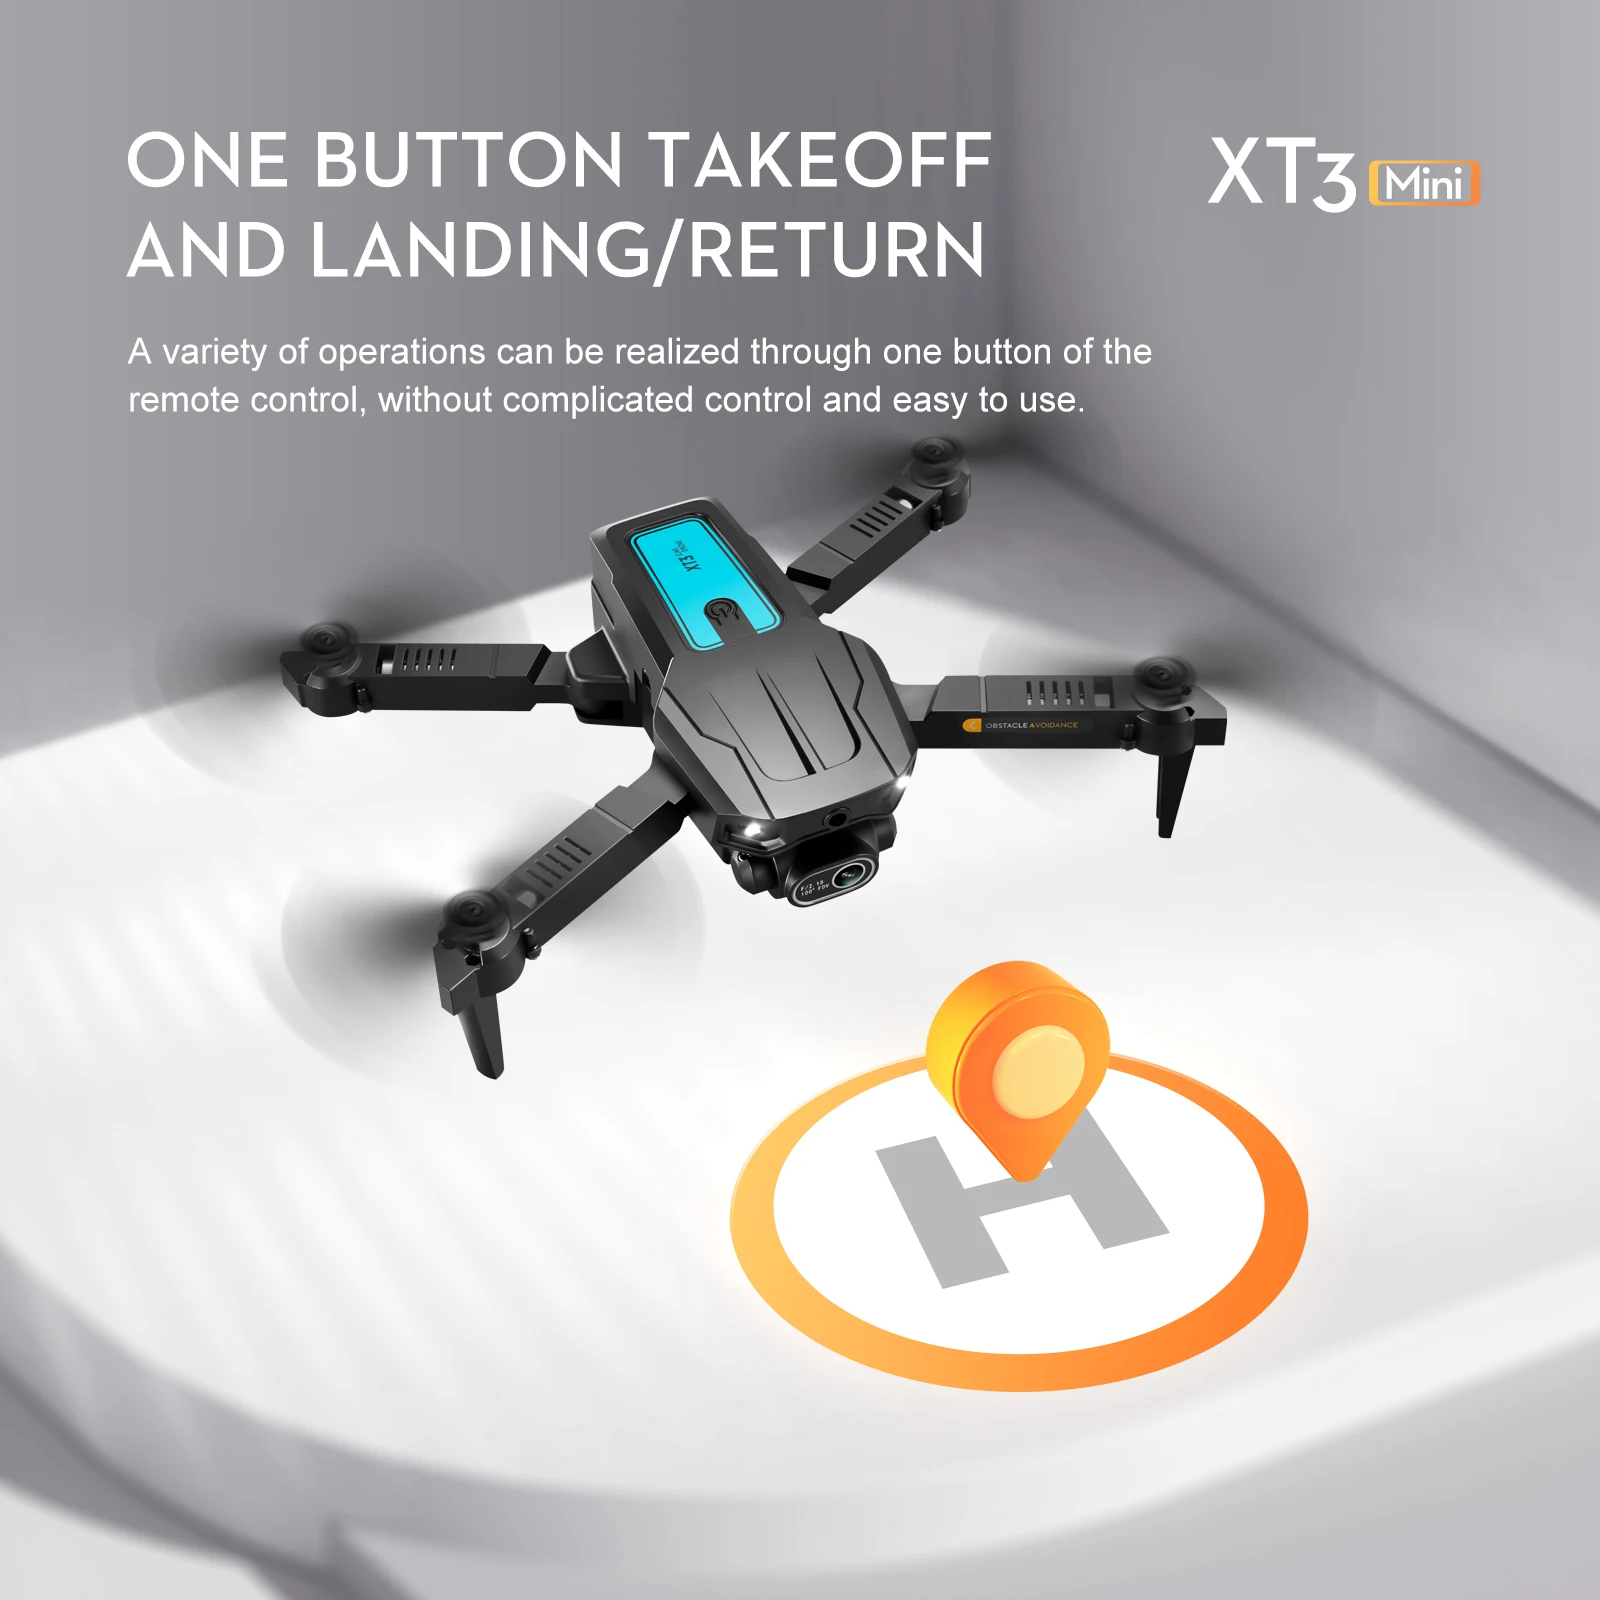 XT3 Drone, one button takeoff xt3c mini and landing/re